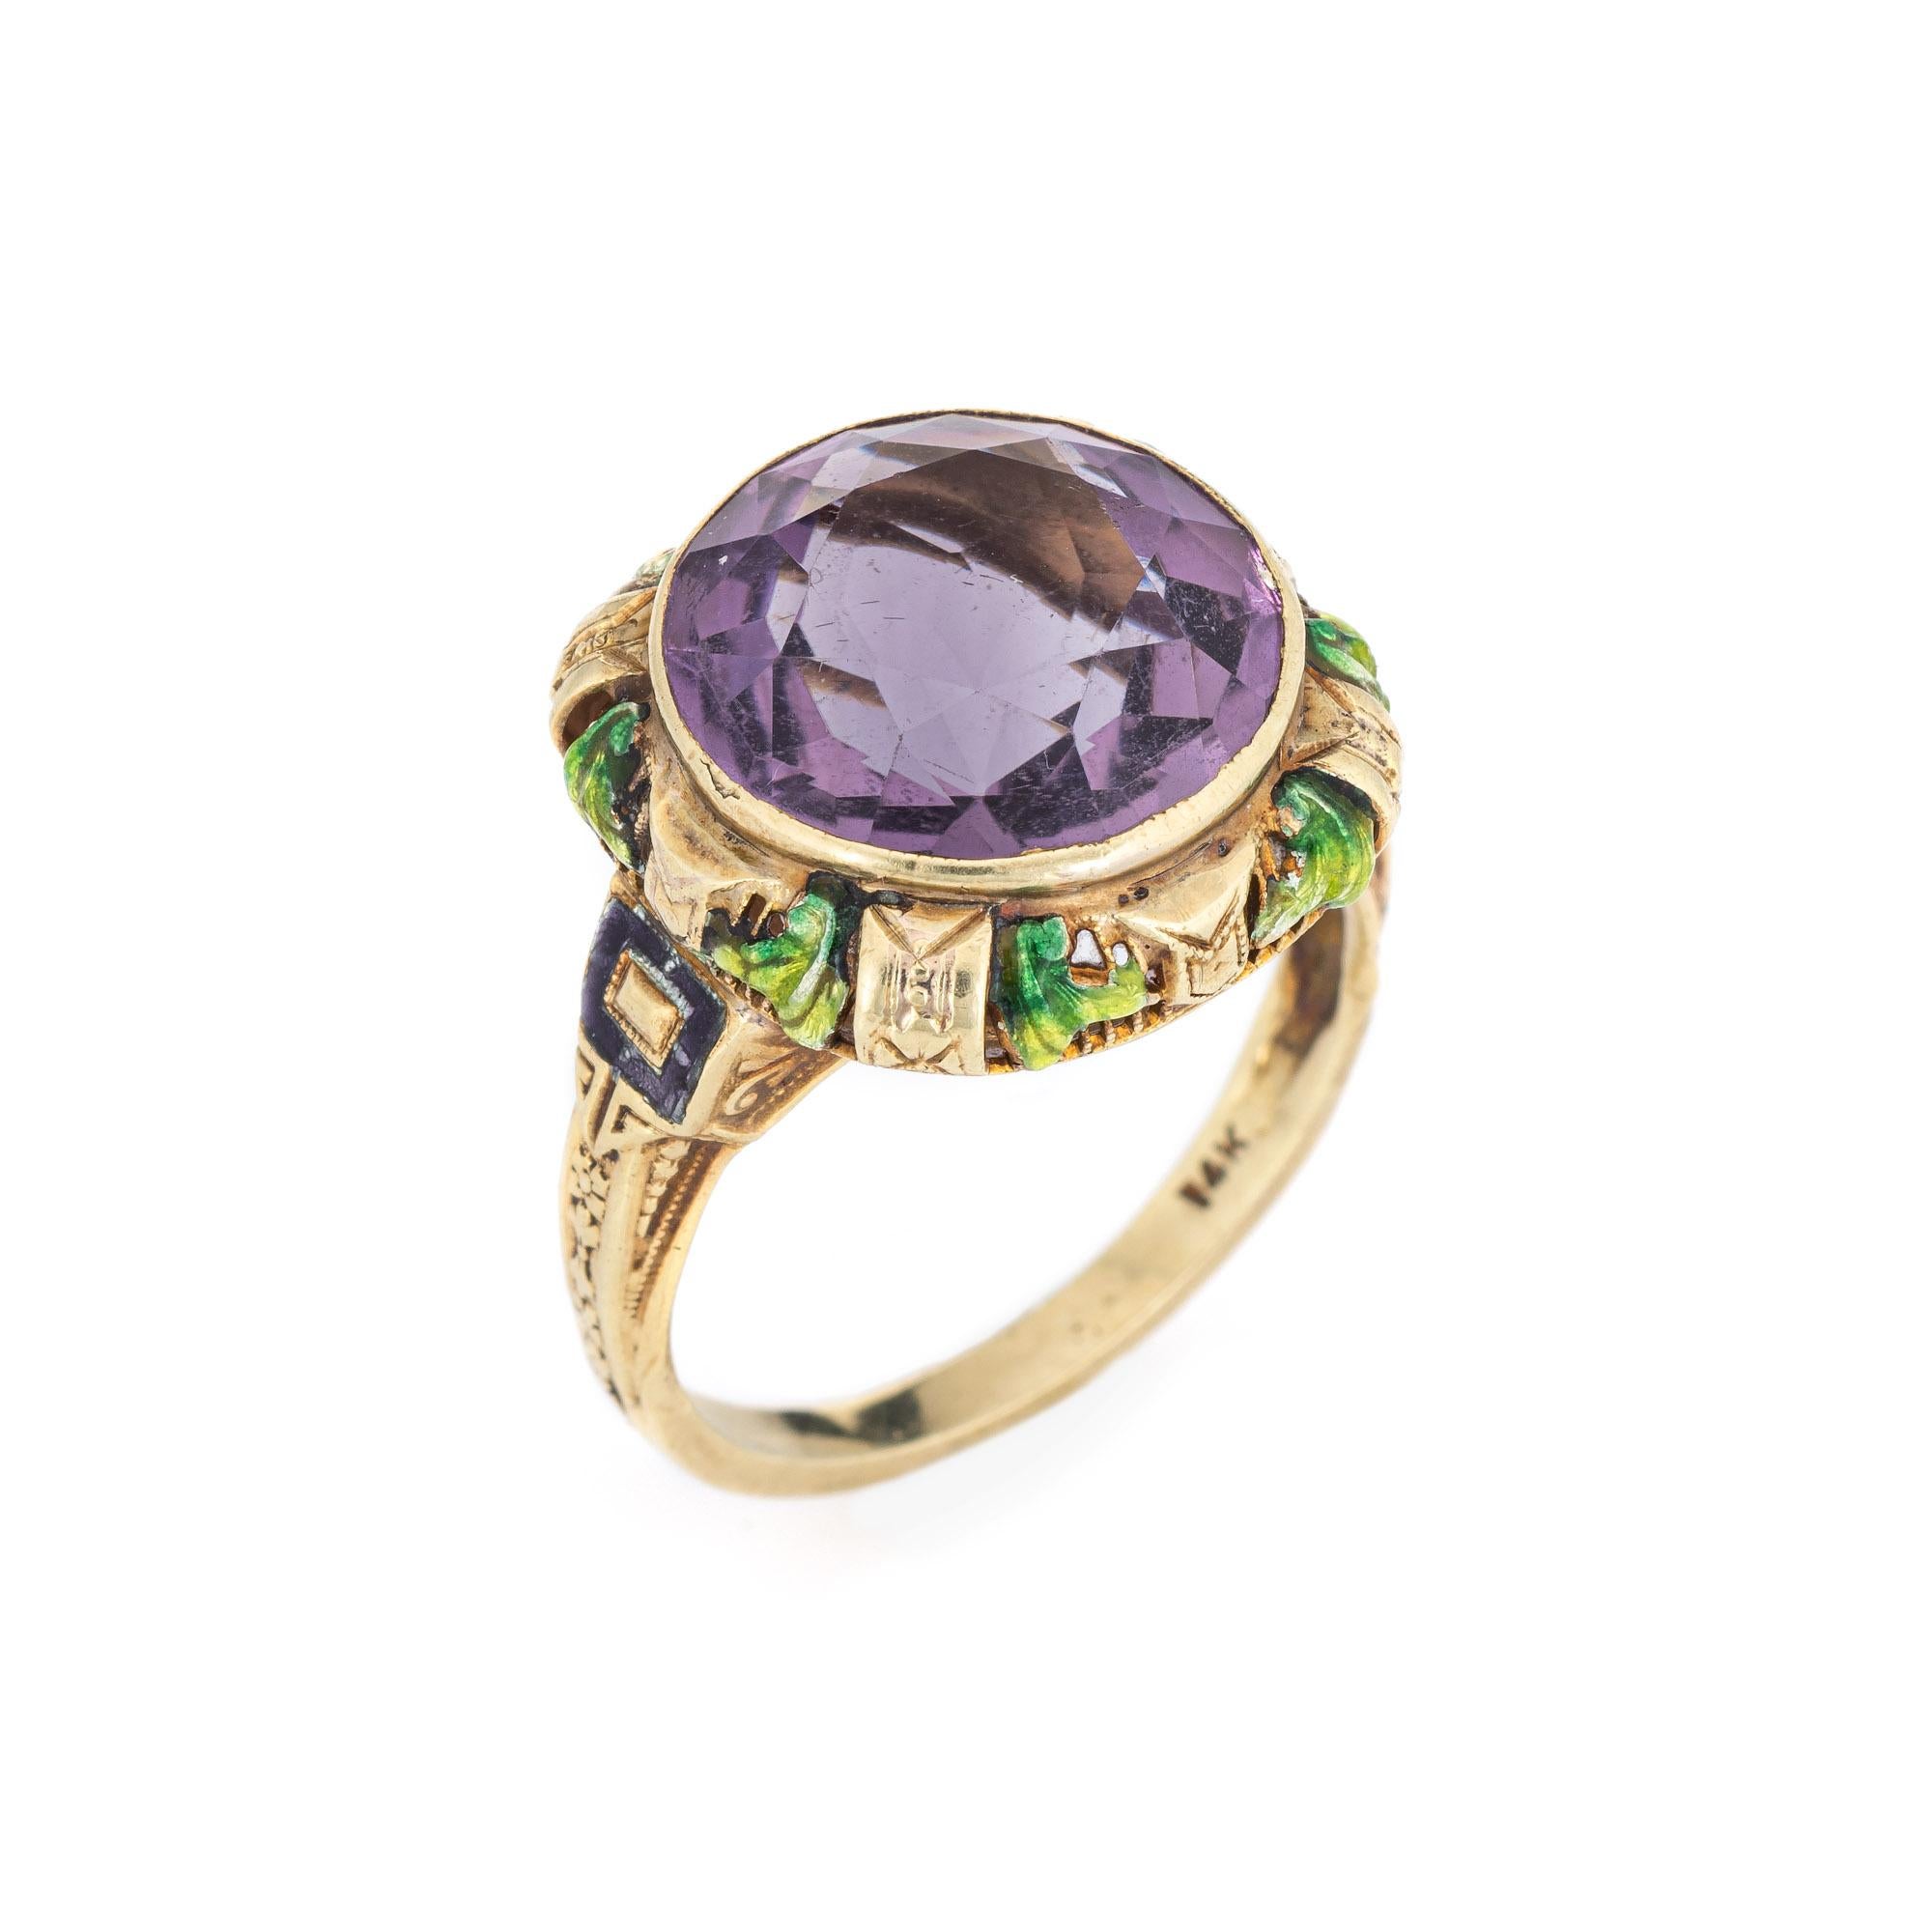 Finely detailed vintage Art Deco era amethyst enamel ring (circa 1920s to 1930s) crafted in 14k yellow gold. 

Faceted round cut amethyst is estimated at 5.50 carats. The stone shows some light abrasions visible under a 10x loupe. 

The finely